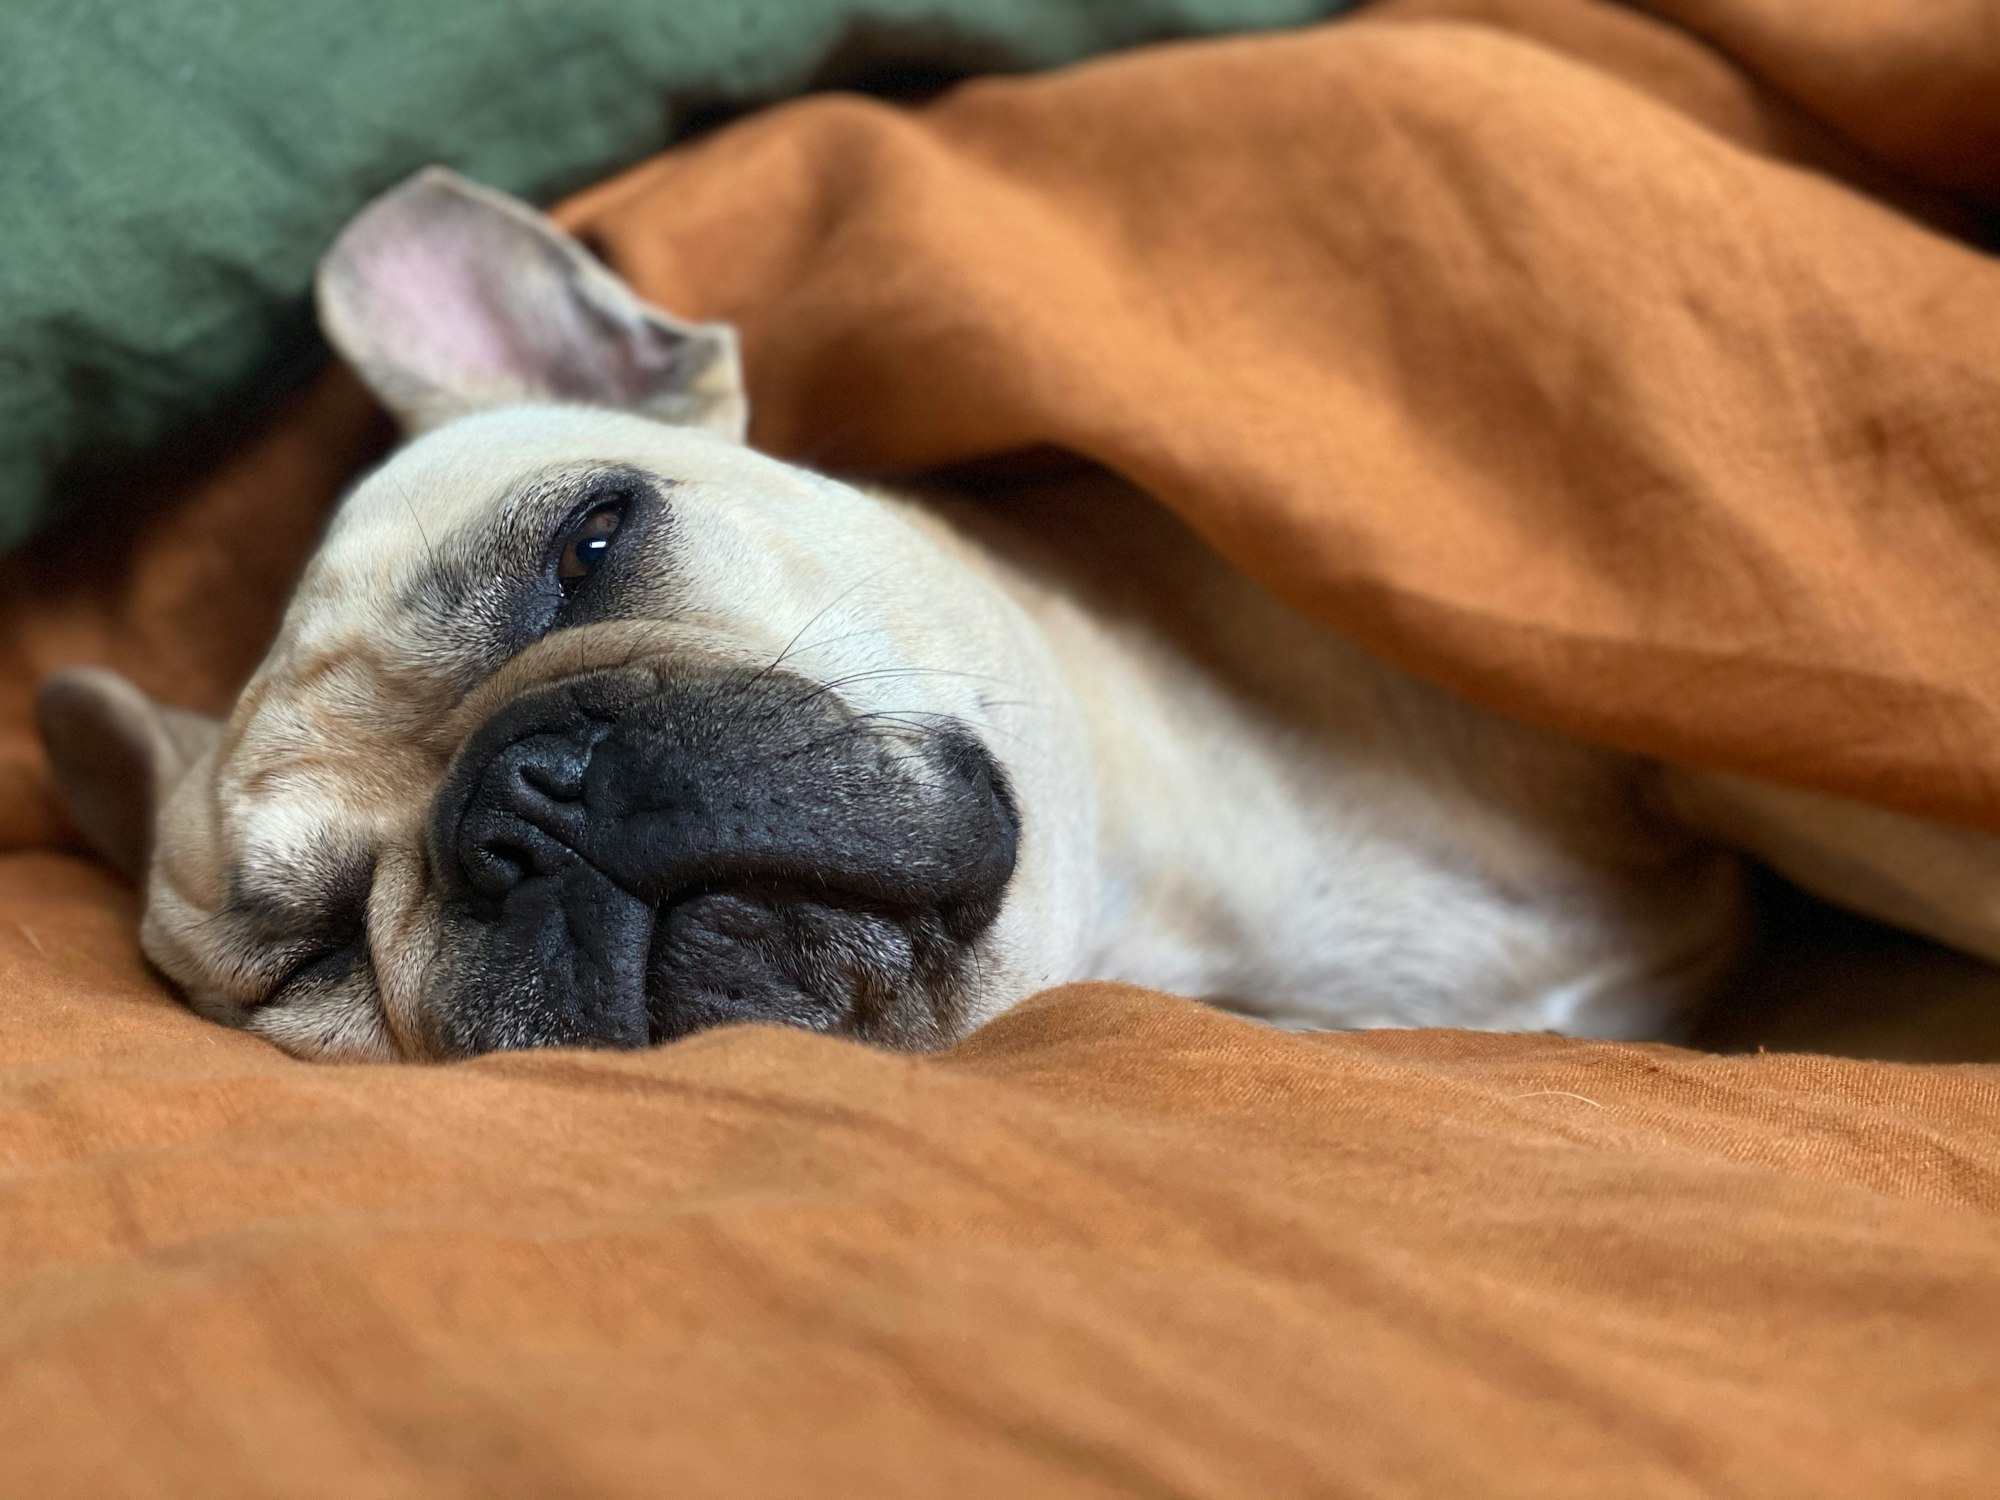 How to tell if your dog is relaxed: Body language and signs